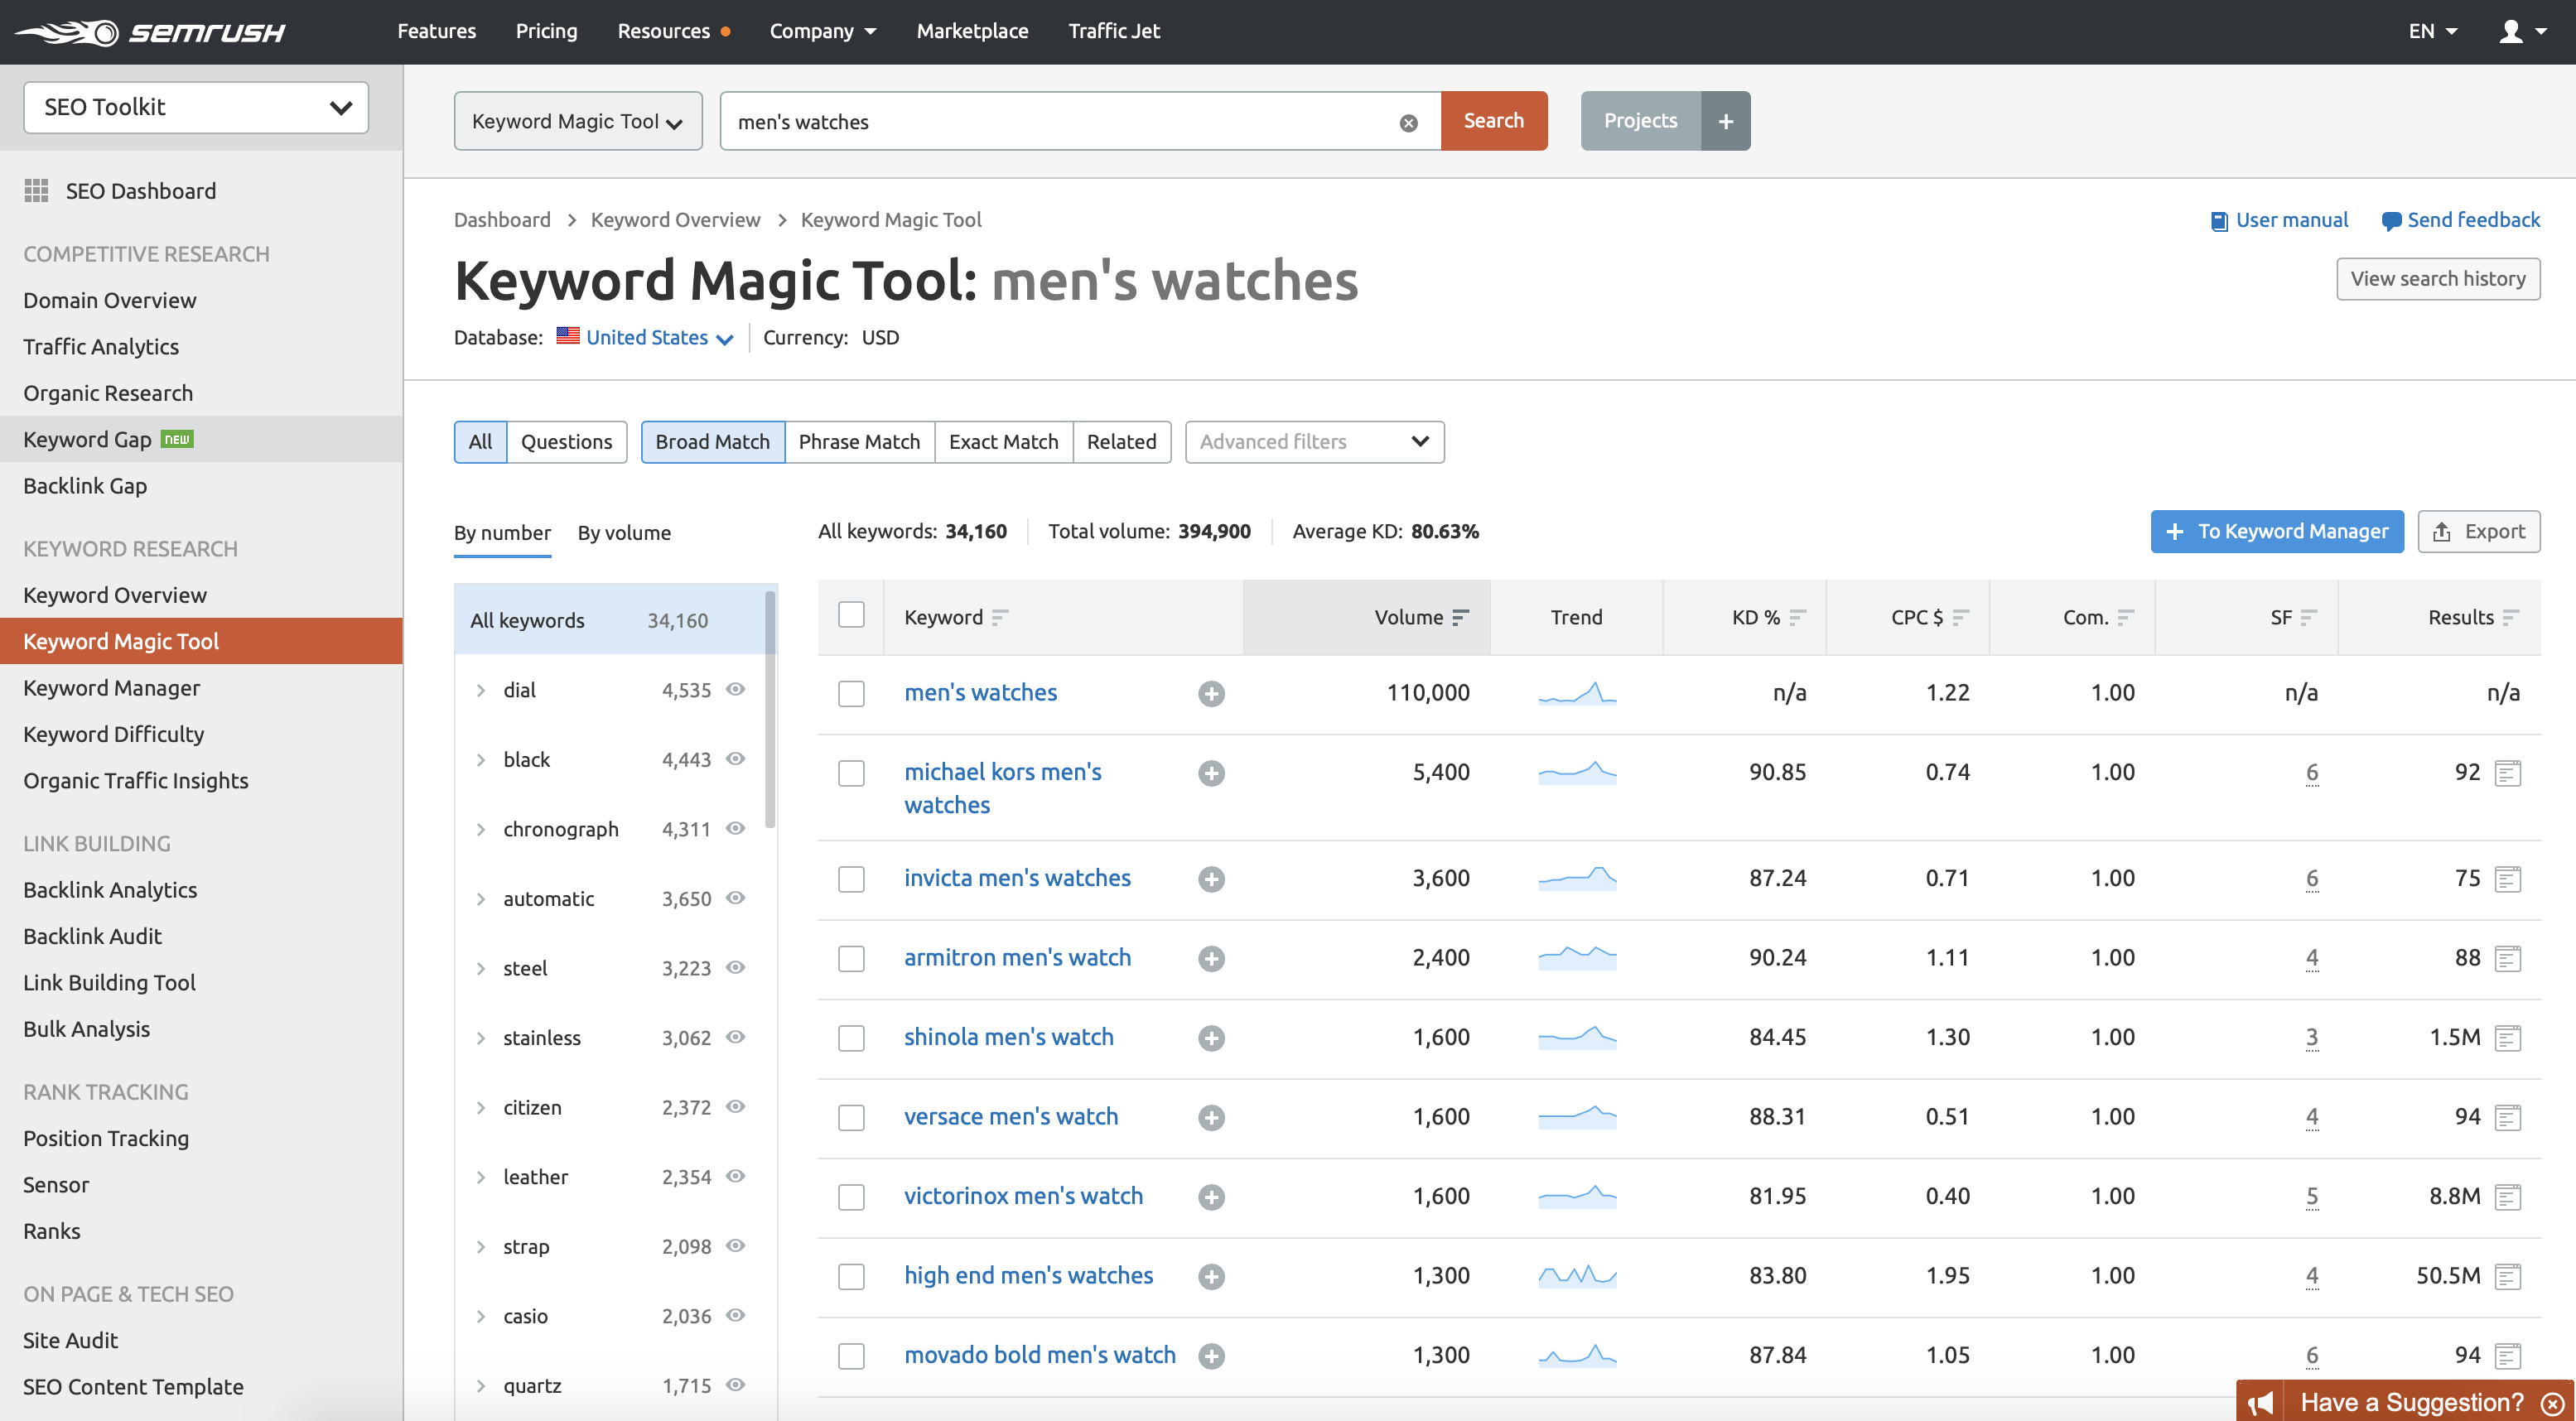 semrush keywood tool page results for men's watches